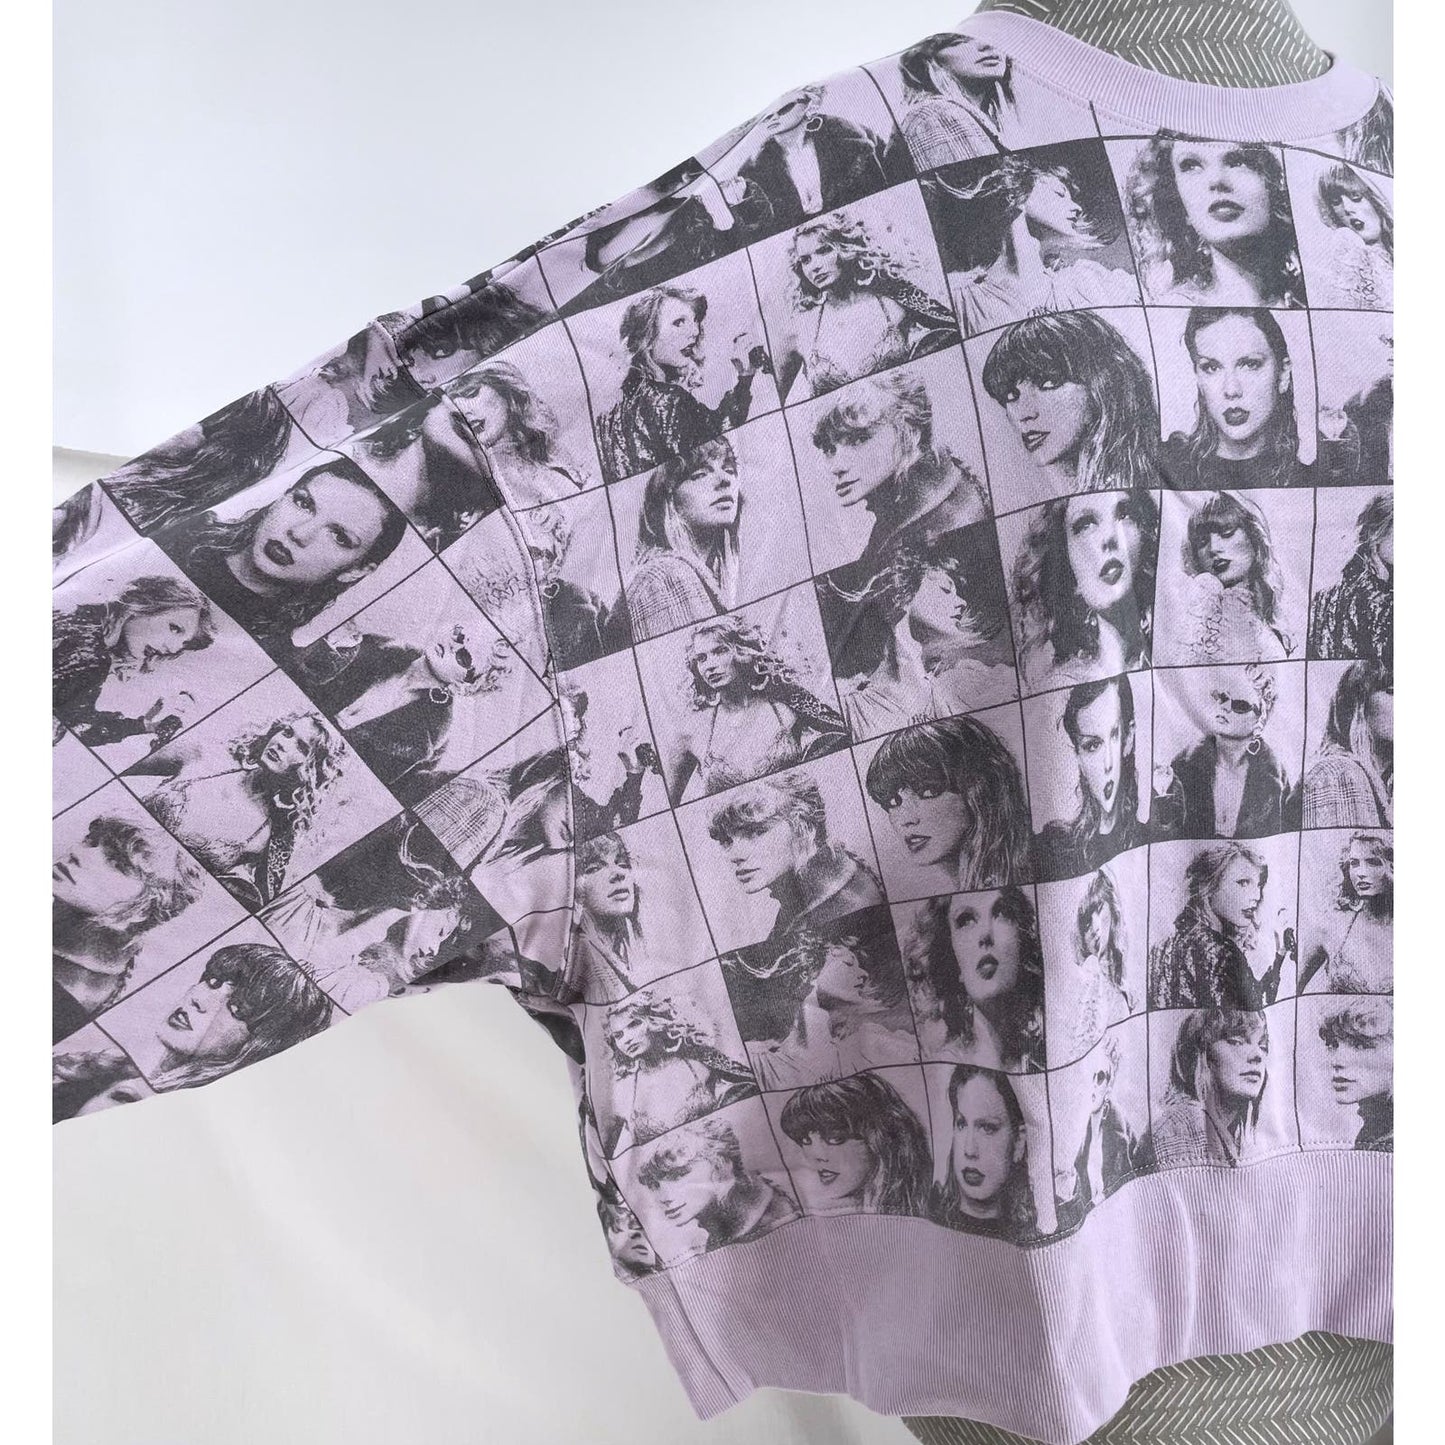 Taylor Swift Eras Tour Cropped Lavender Pullover Sweatshirt All Over Print Size XL